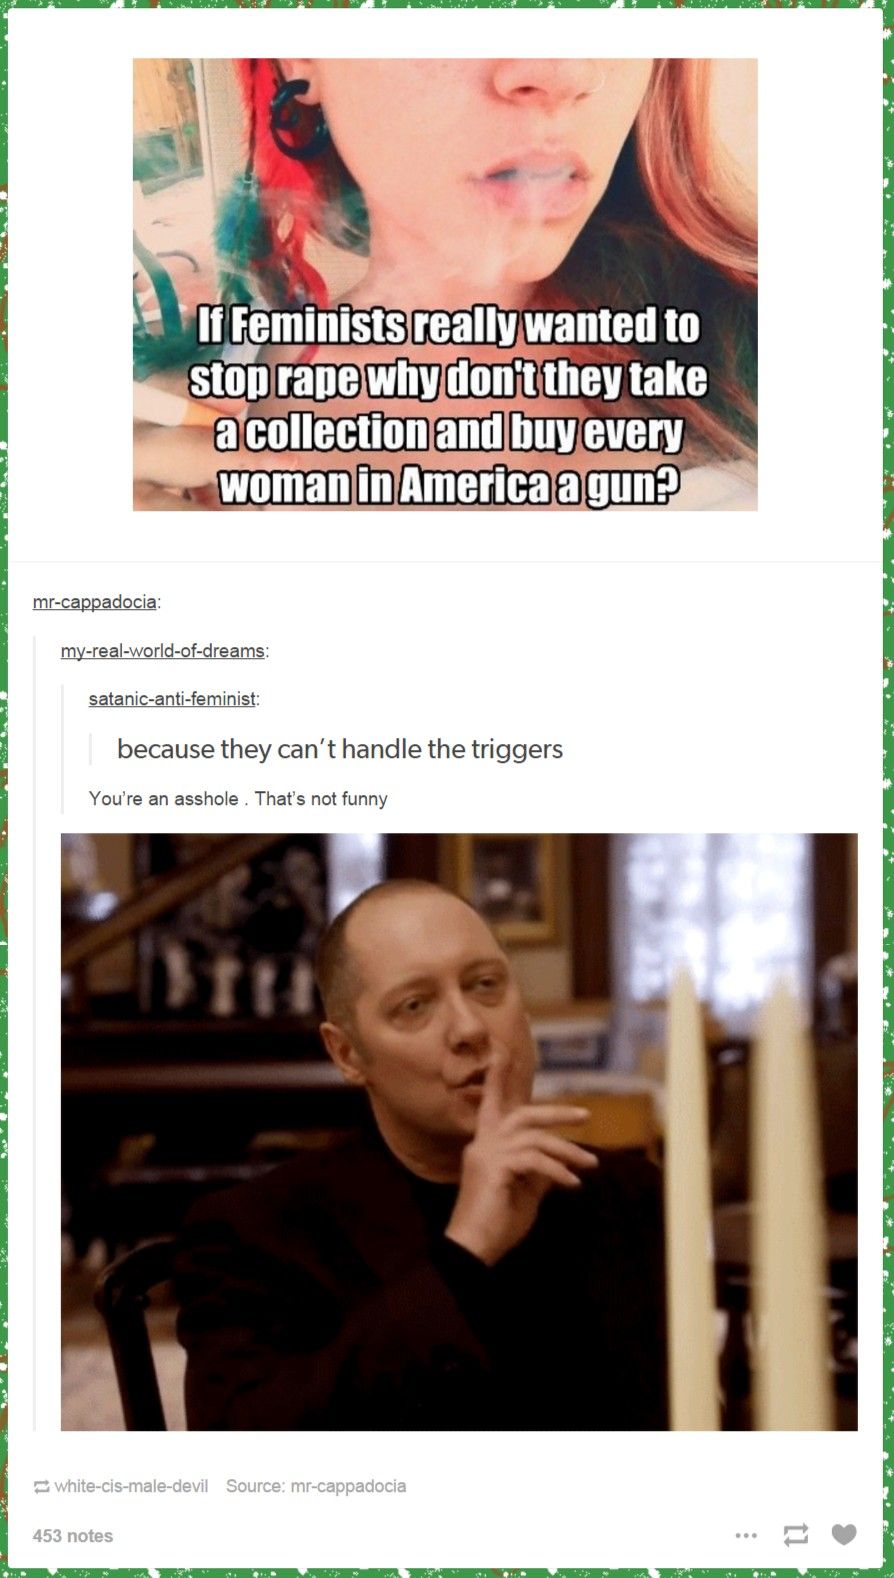 Feminist can't deal with gun